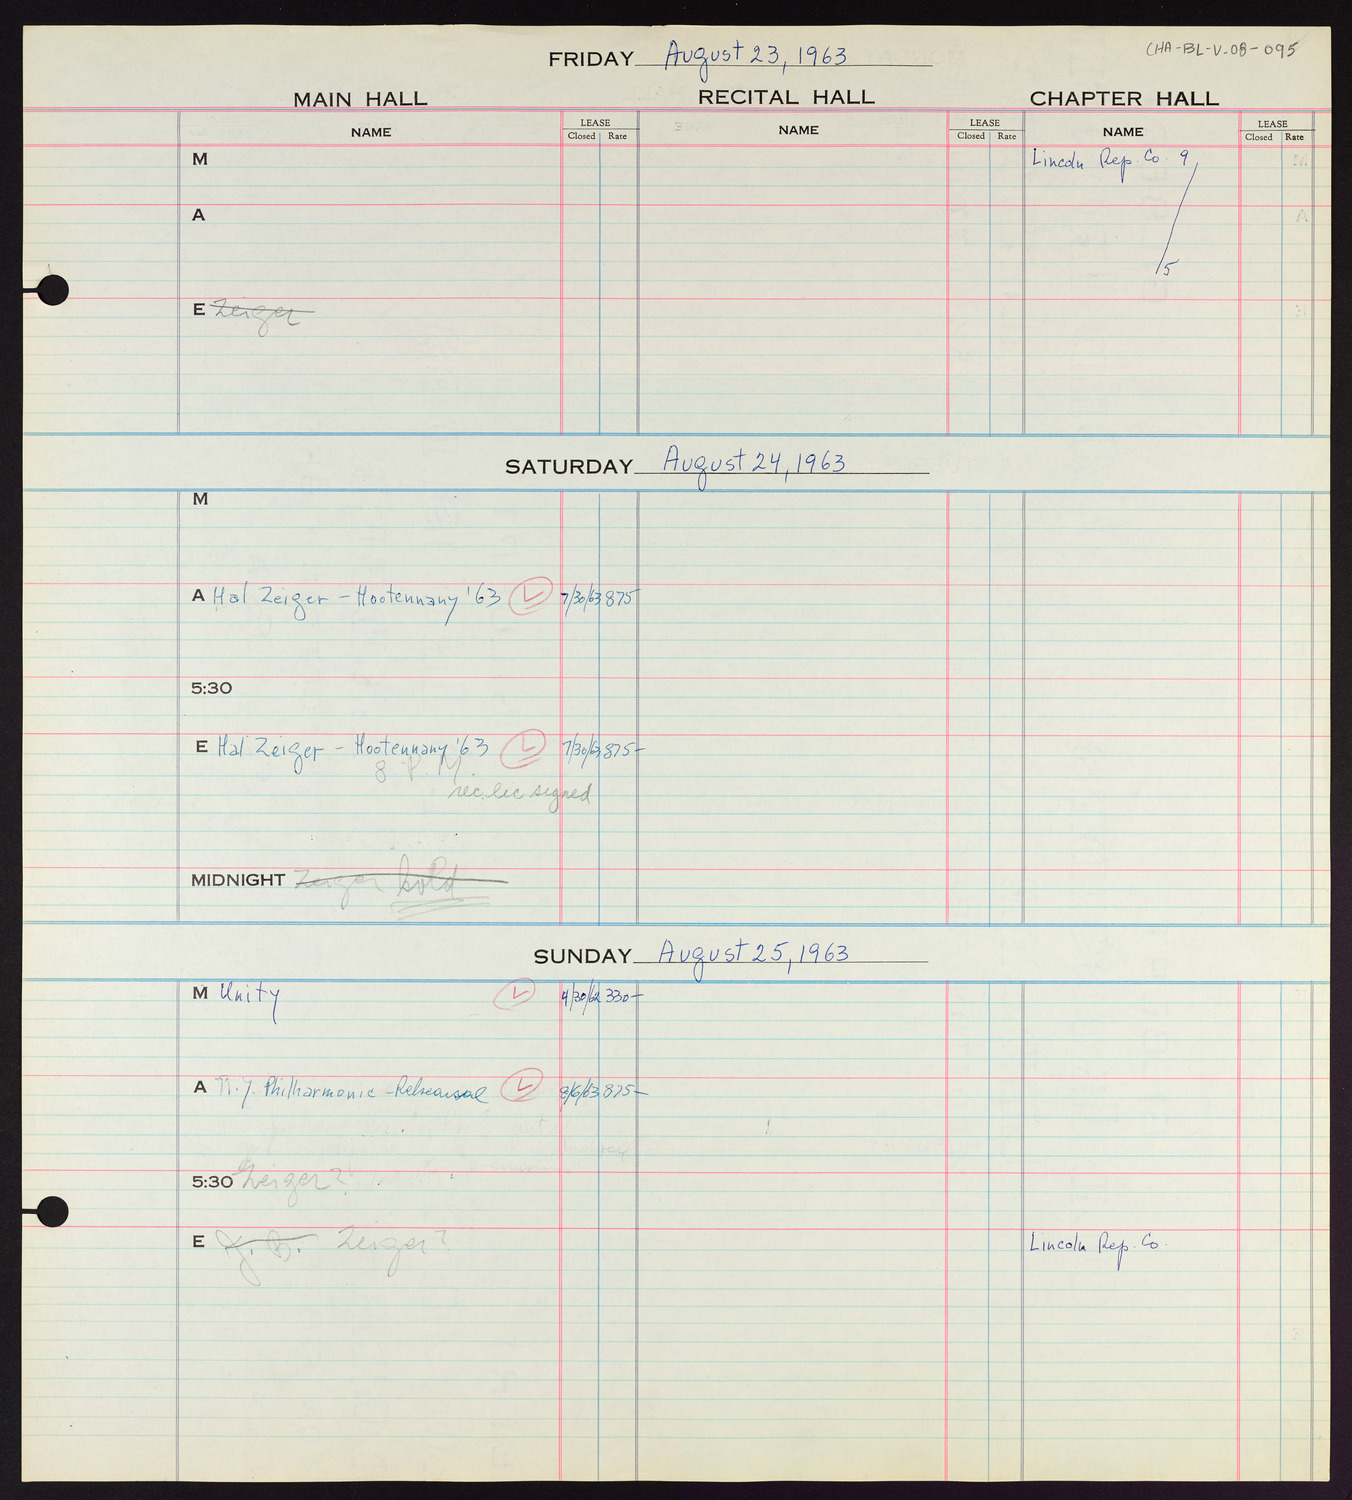 Carnegie Hall Booking Ledger, volume 8, page 95